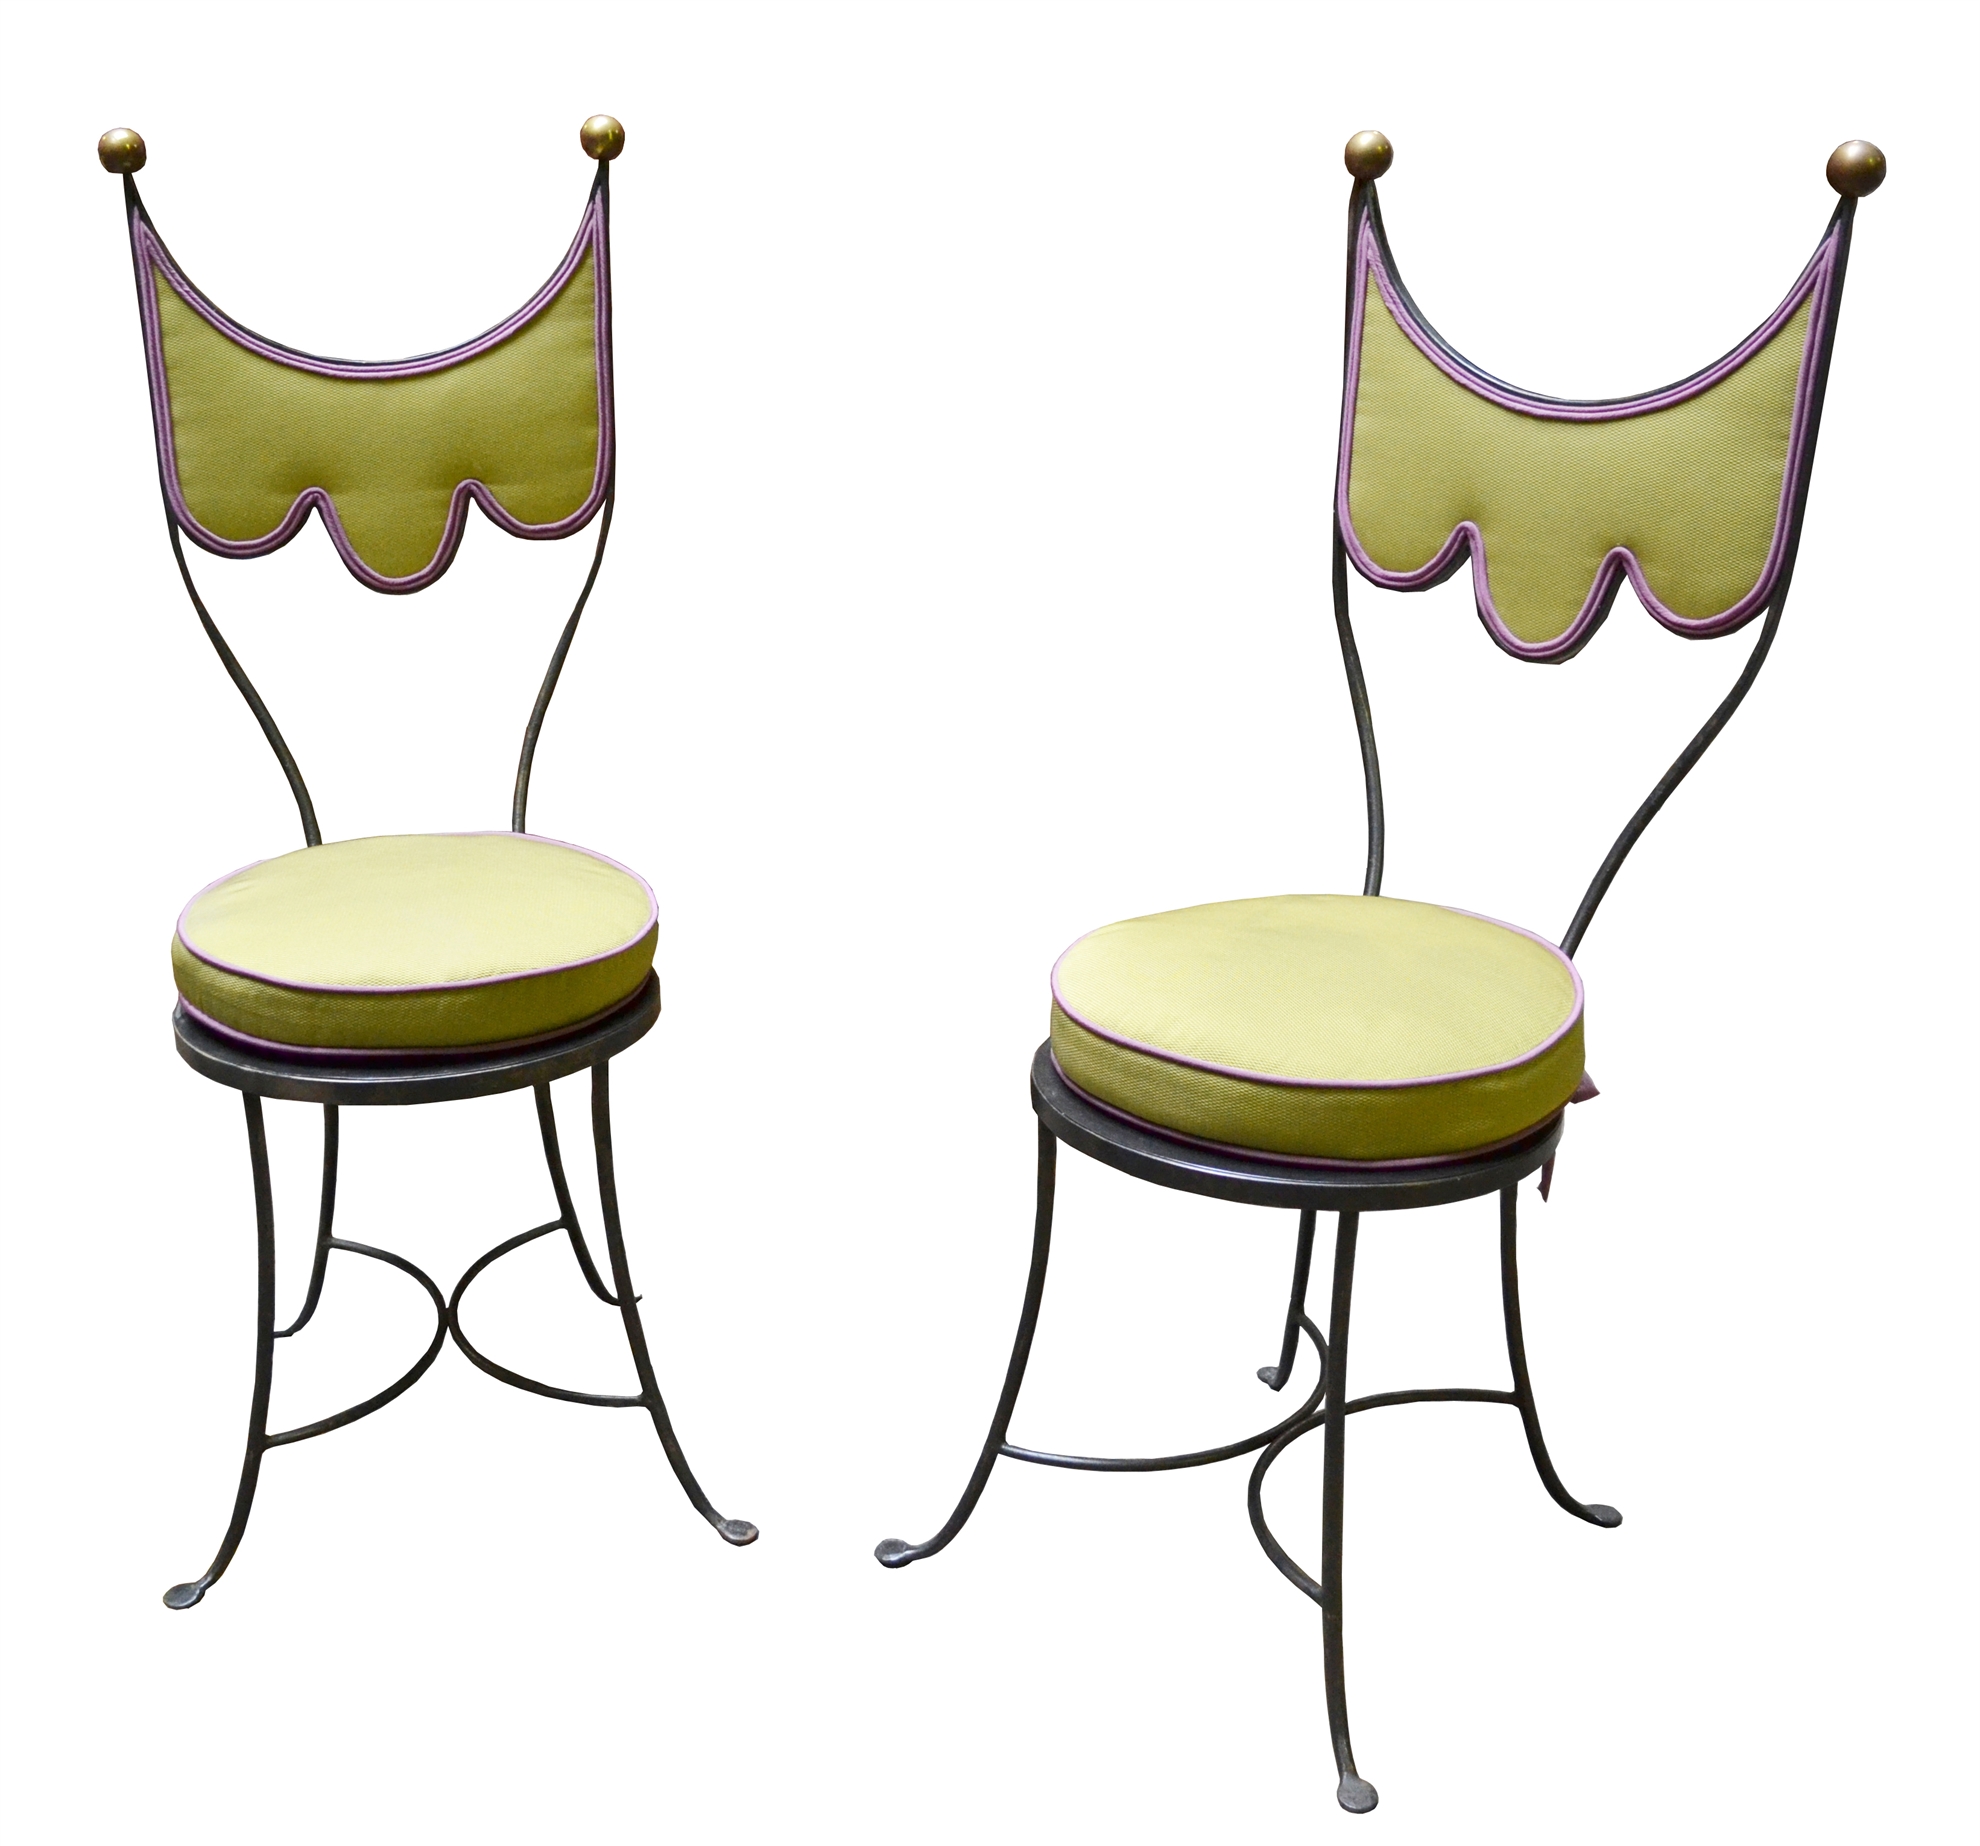 MB/3012 - Pair of Decorative Chairs by Erwin Gruen